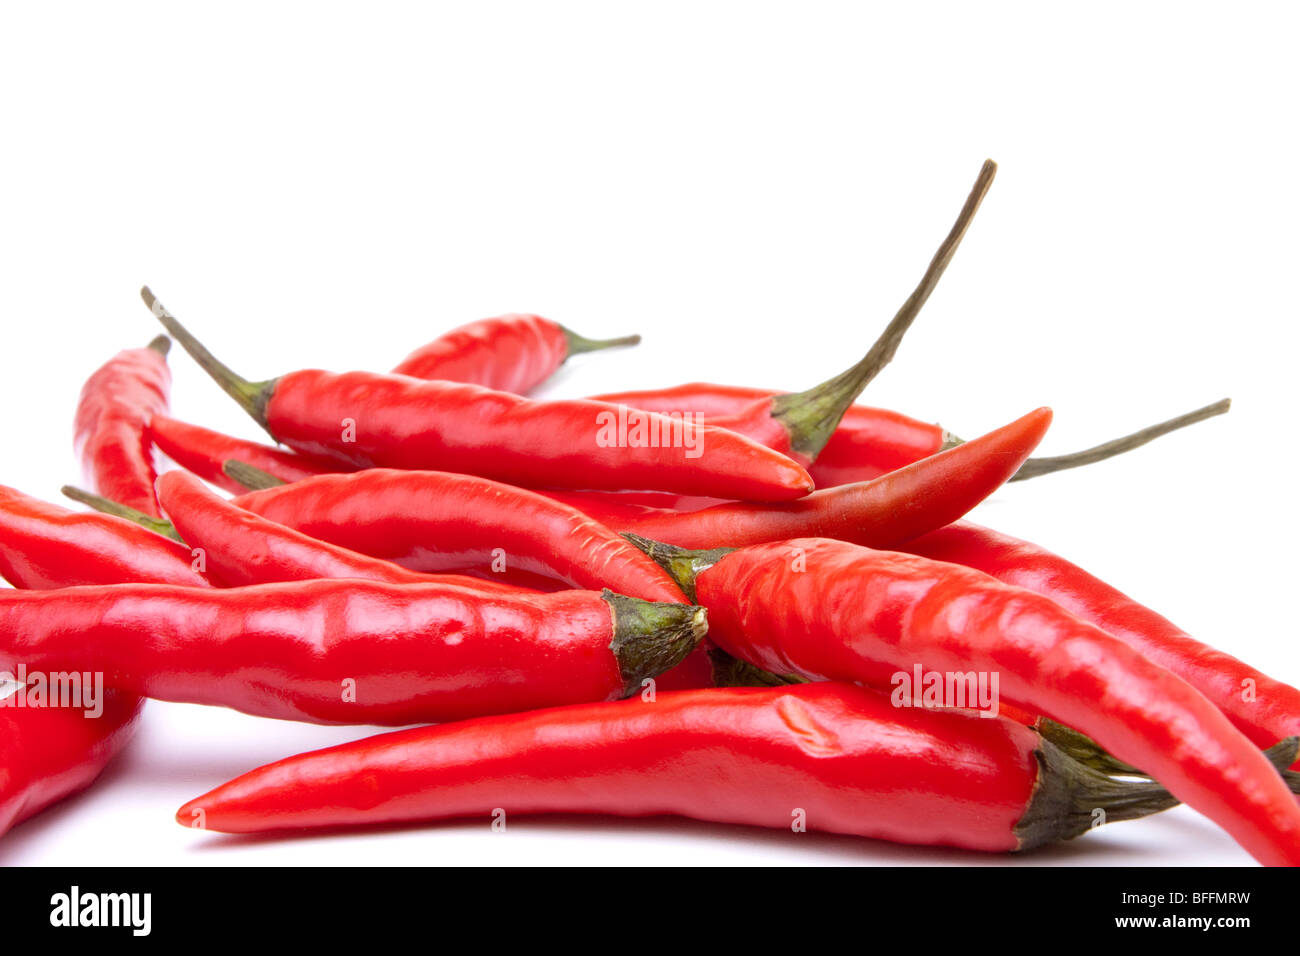 A carpet of red chilli peppers against a white background from low view point. Stock Photo